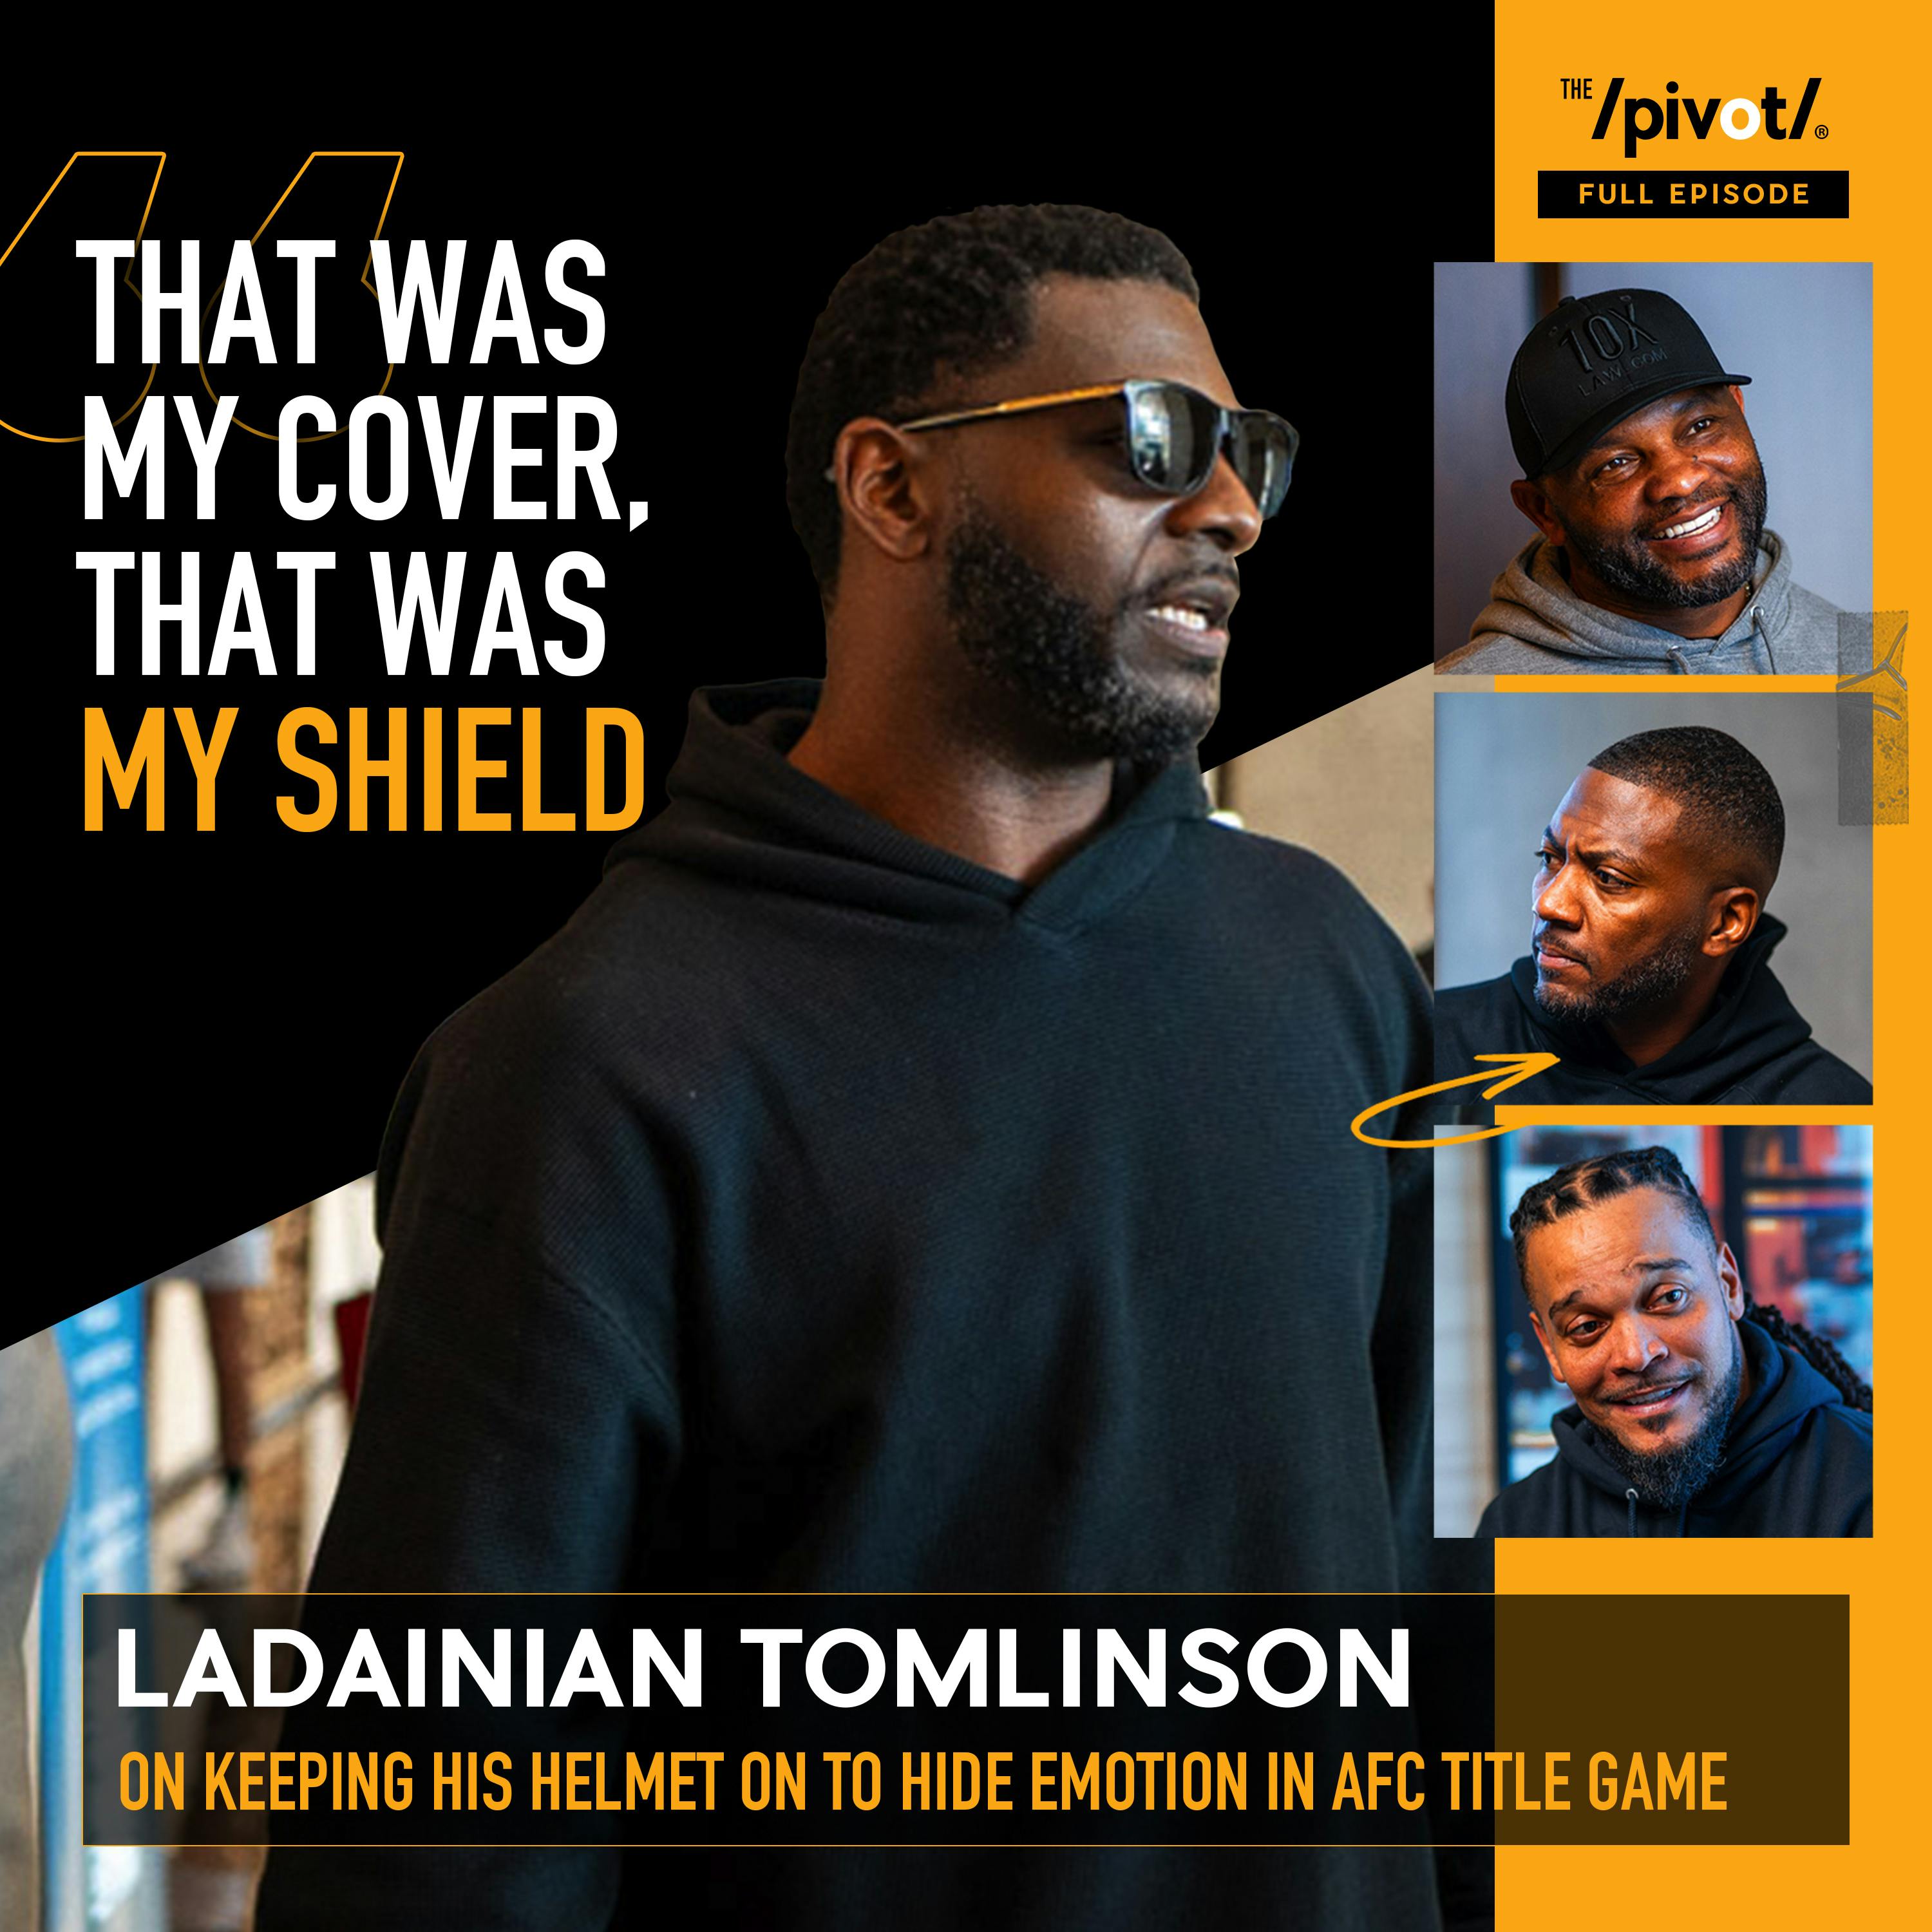 LaDainian Tomlinson Hall of Fame Running Back talks about his NFL Career, record breaking seasons, coming up short, growing up on slave plantation, relationship with his dad & his biggest disappointme